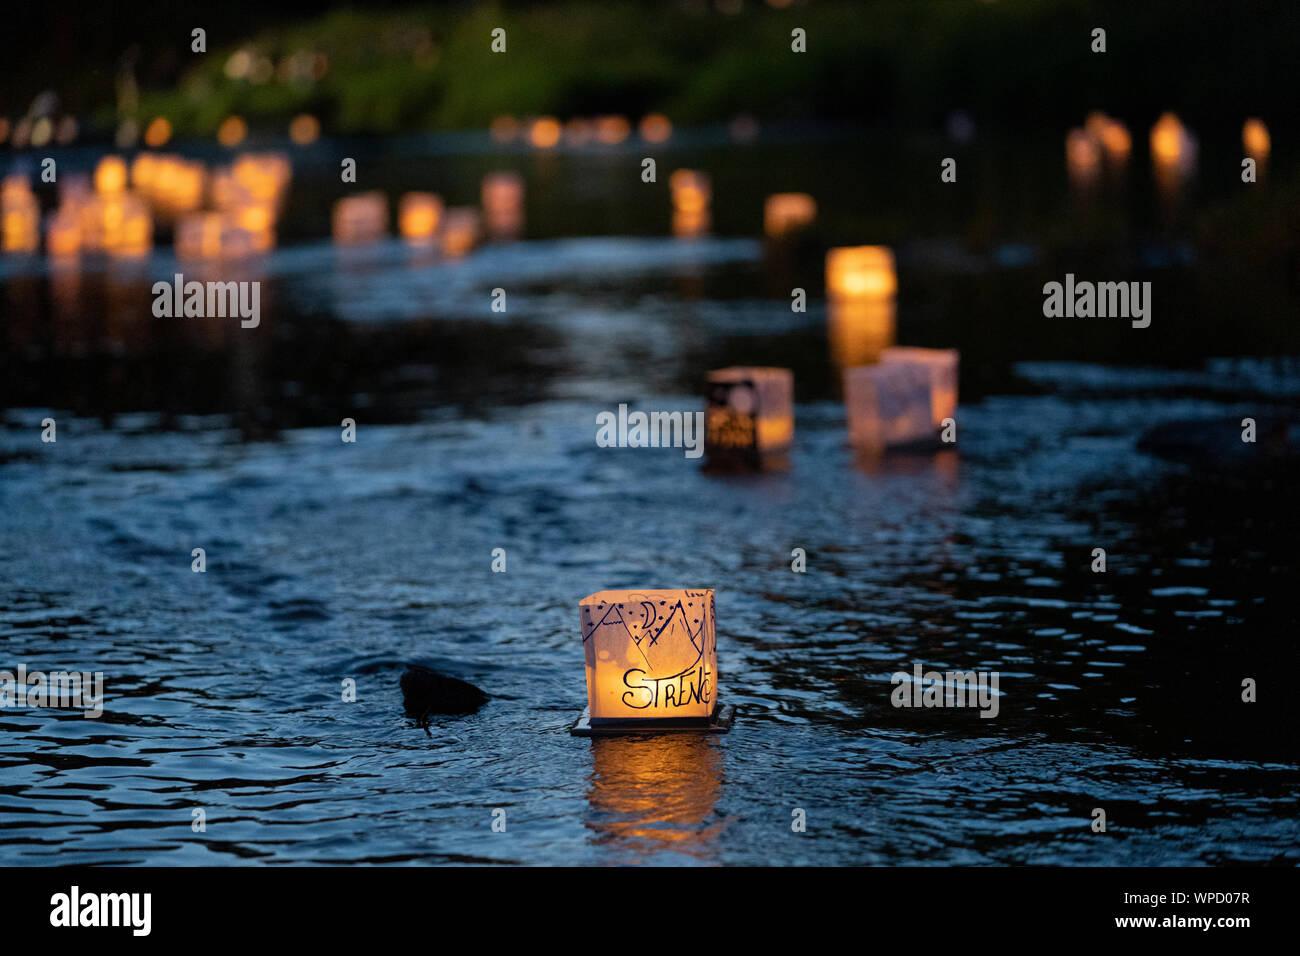 Many water Lanterns float downstream from people releasing them at Pamperin Park in Green Bay, Wisconsin Stock Photo